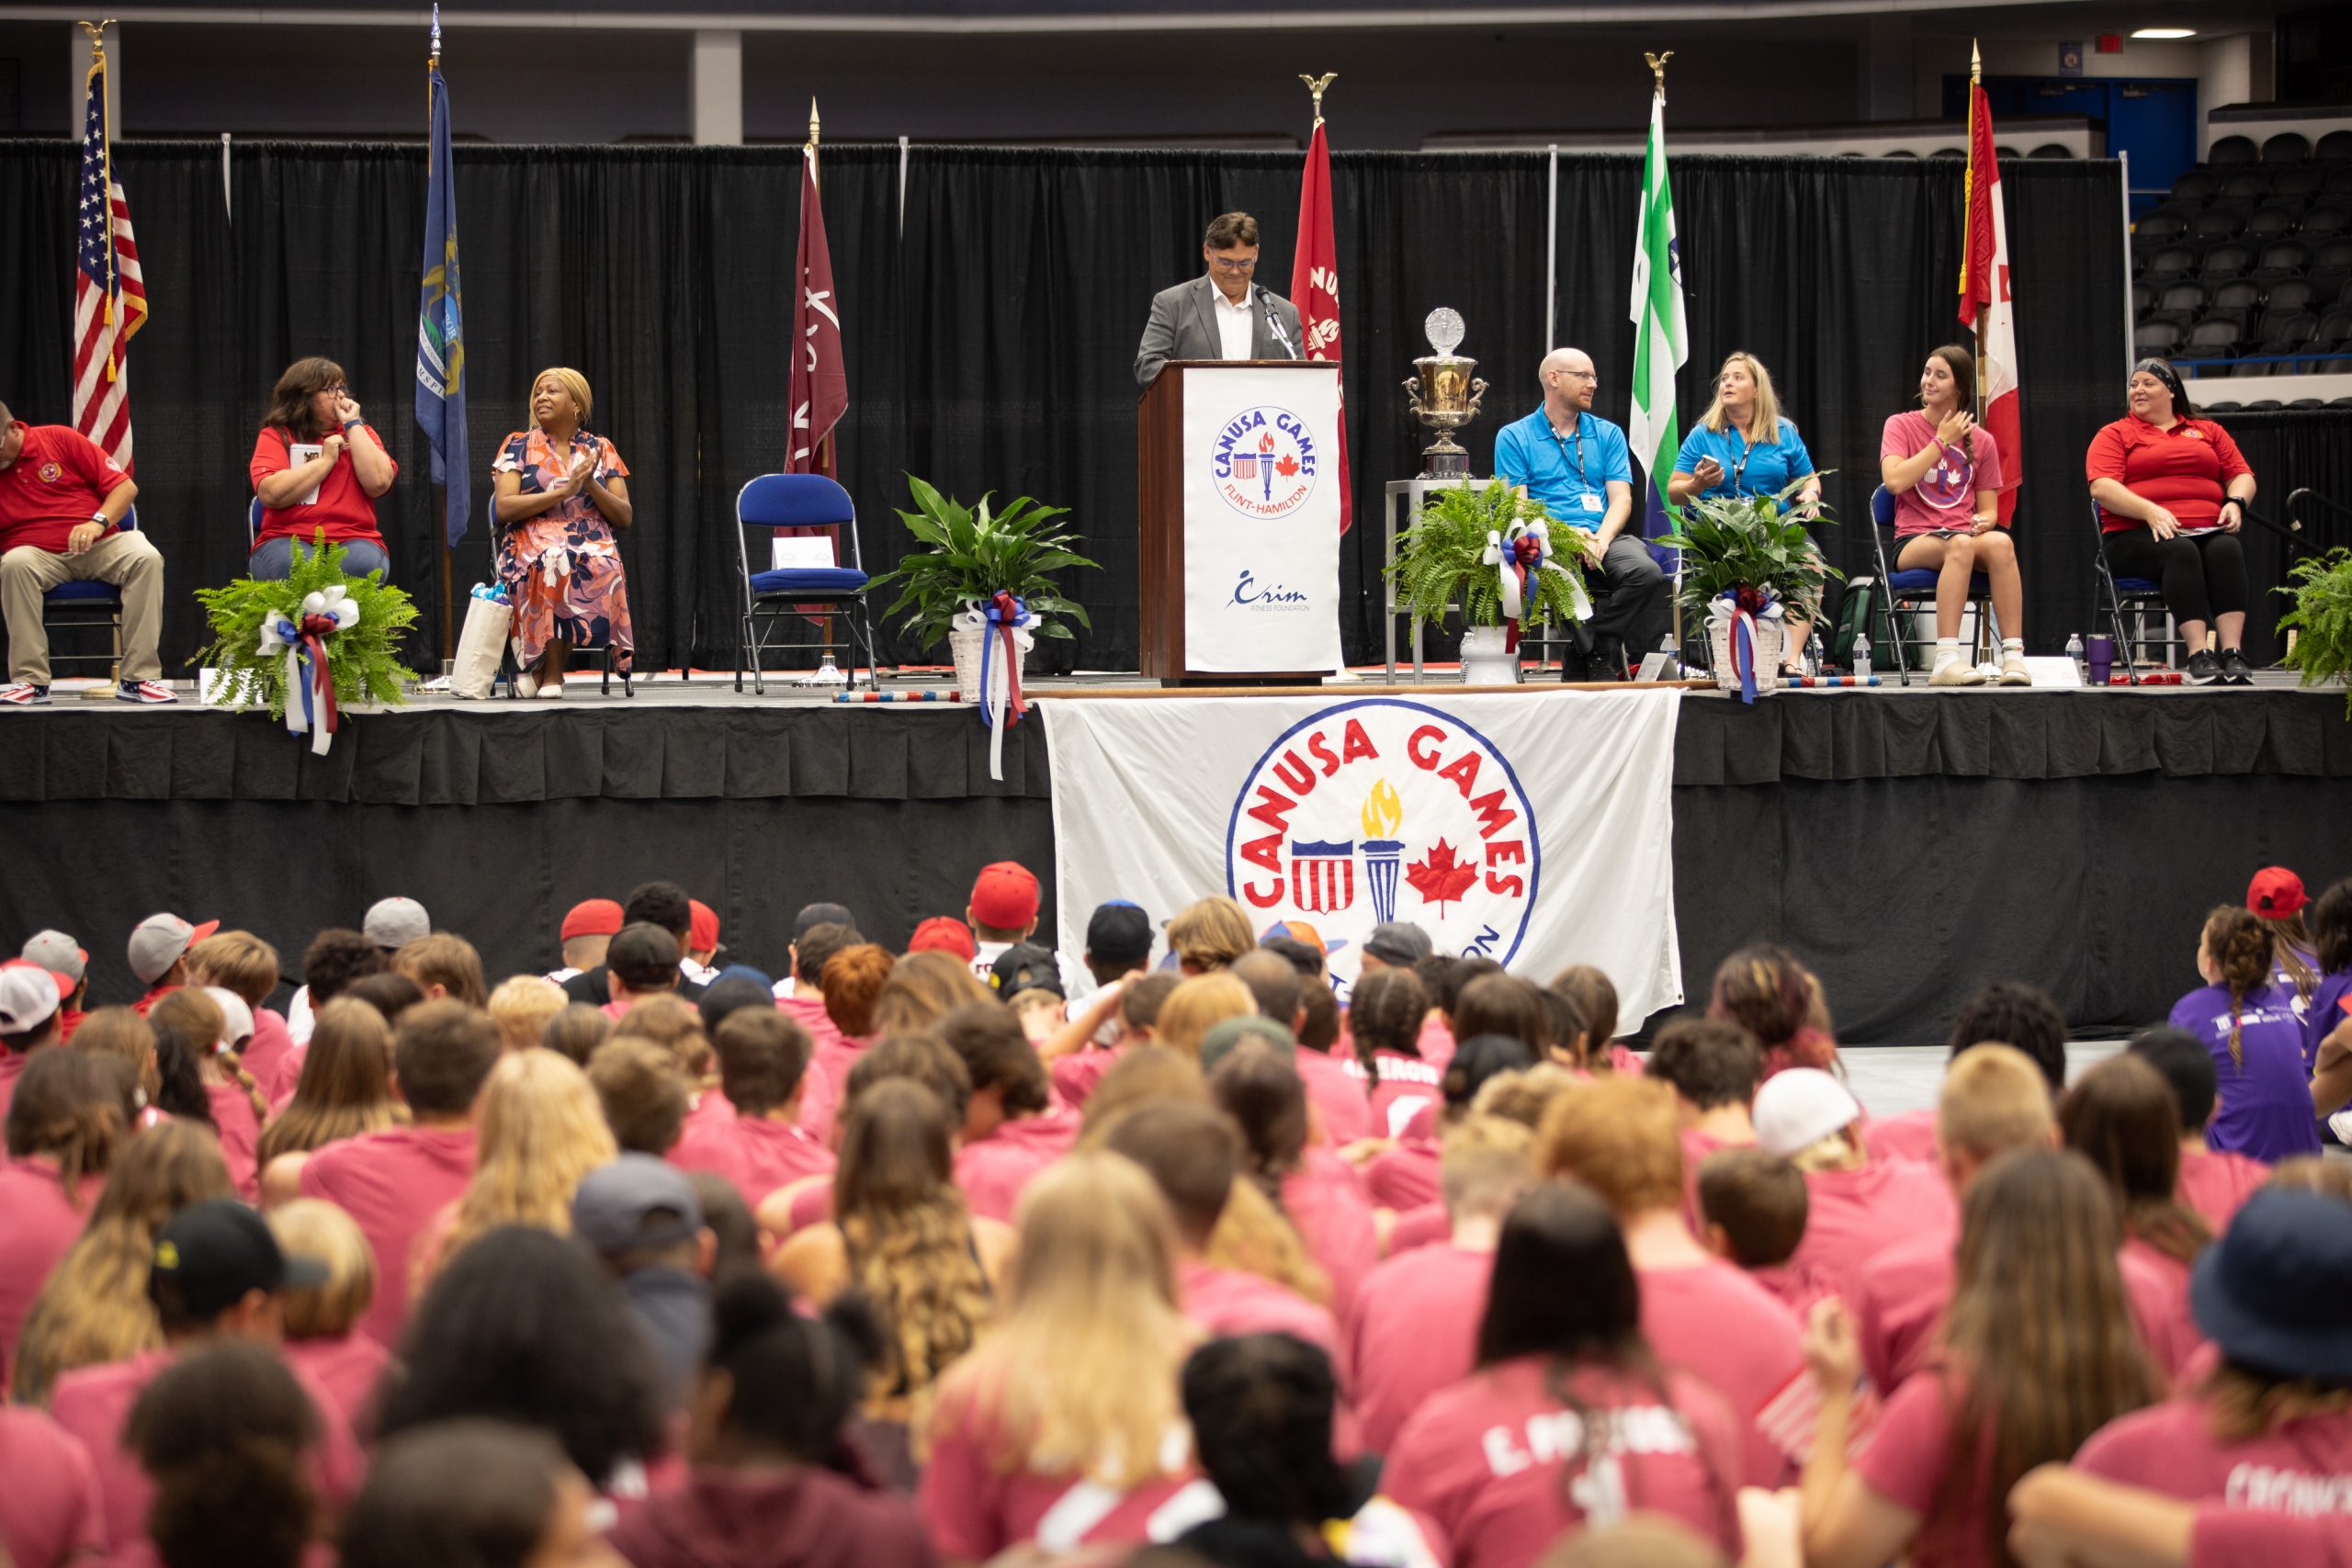 2022 CANUSA Opening Ceremony at the Dort Financial Event Center.